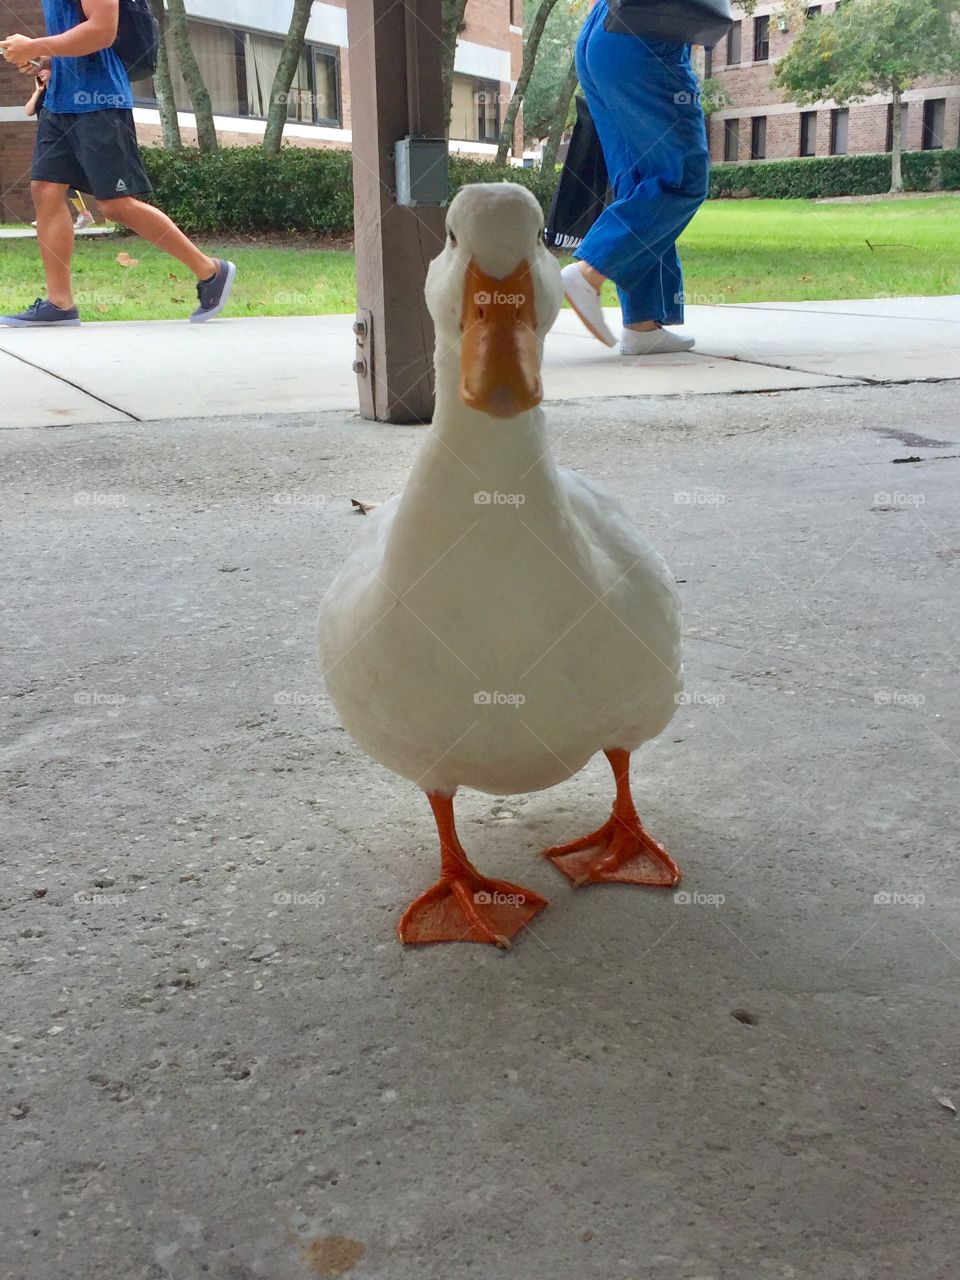 Meet Howard the duck. He’s a real ladies man! Well, he still loves everyone tho, especially if you feed him some nice vegetables!